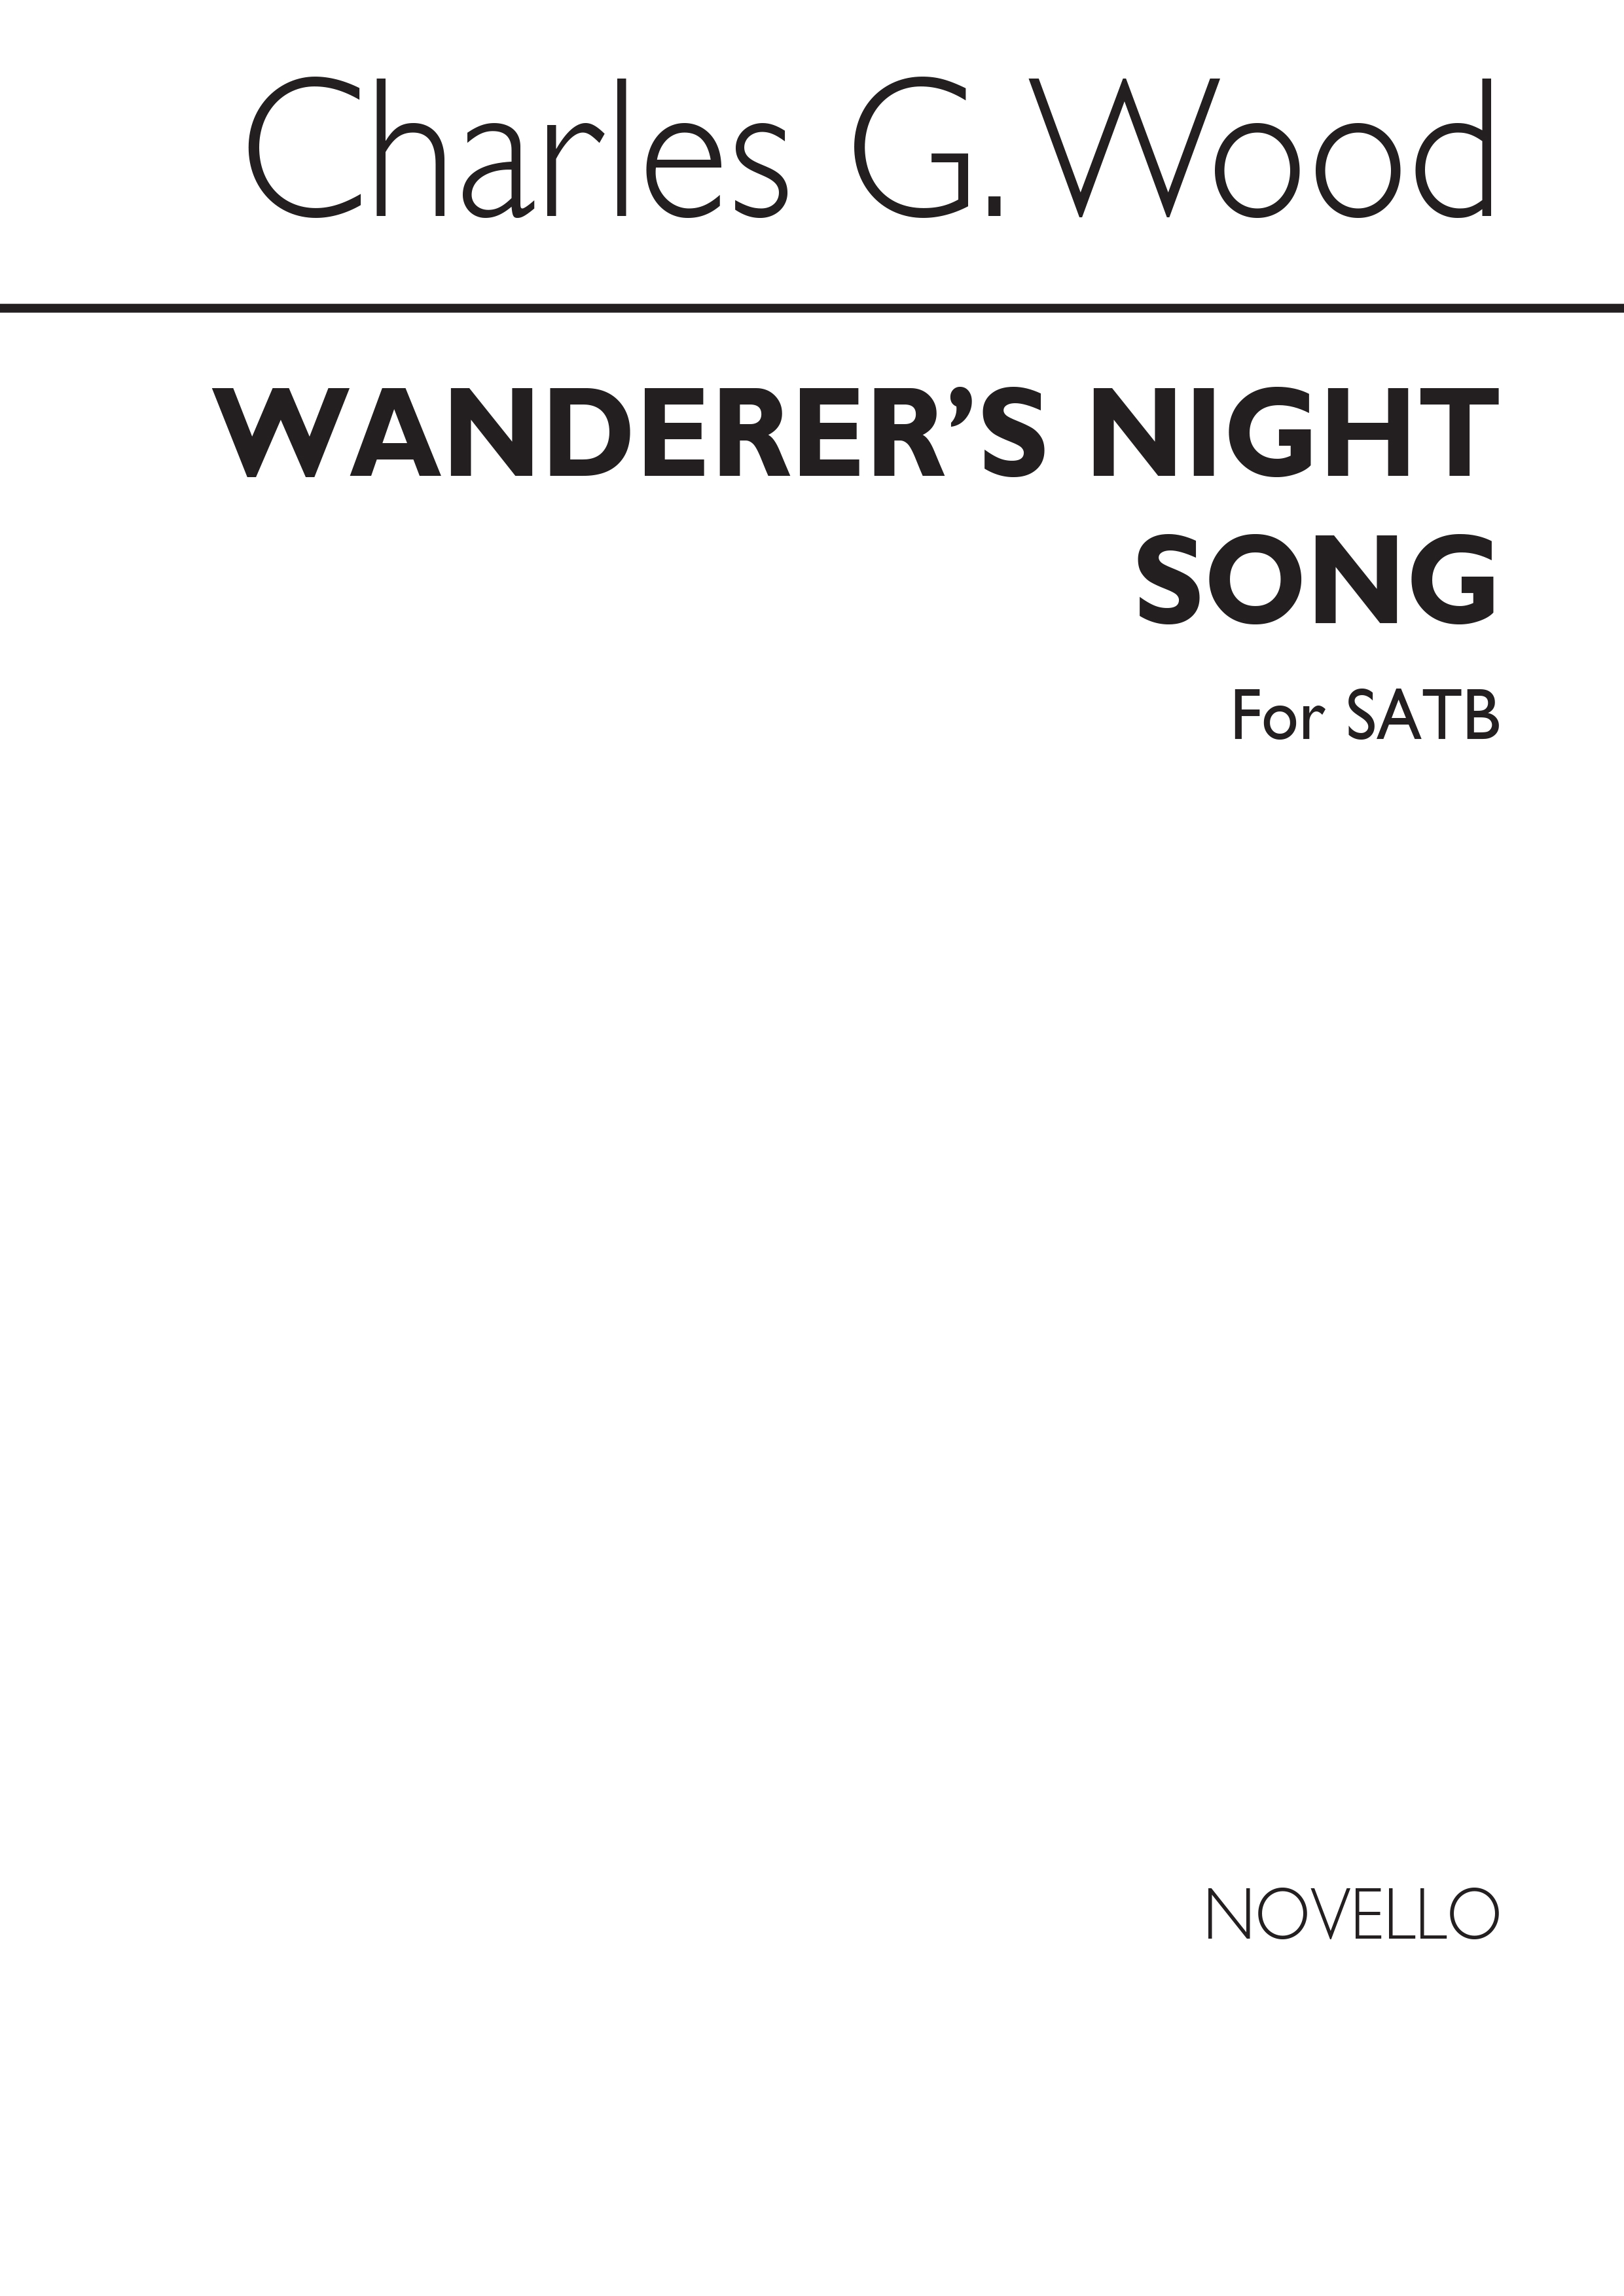 Charles Wood: Wanderer's Night Song